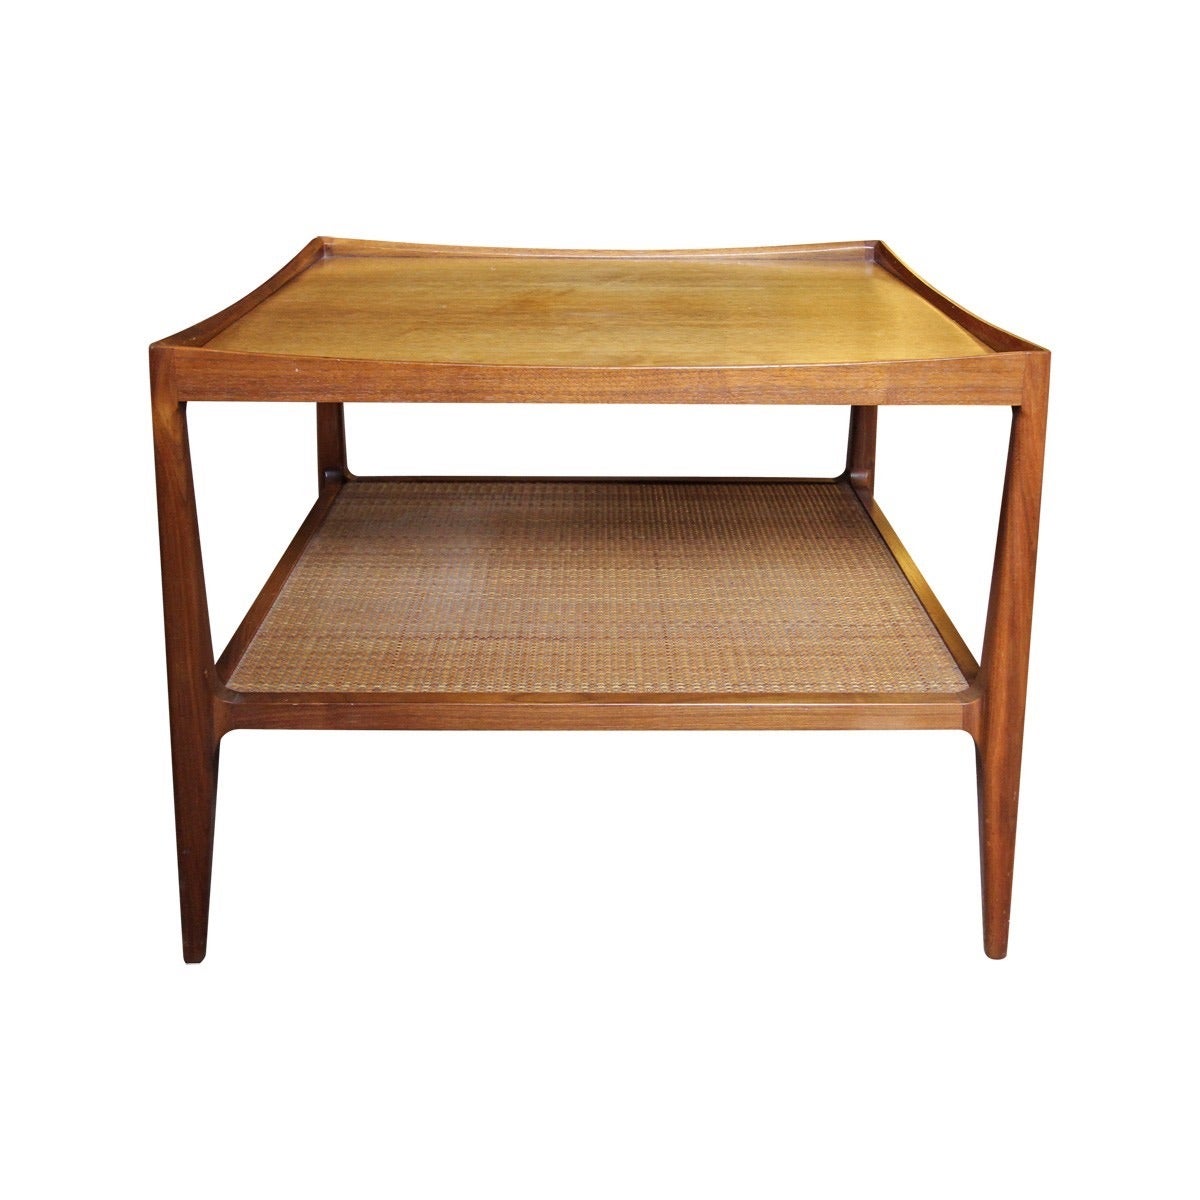 American Mid-Century Drexel Heritage Walnut Side Tables with Caned Shelves, dated 1958